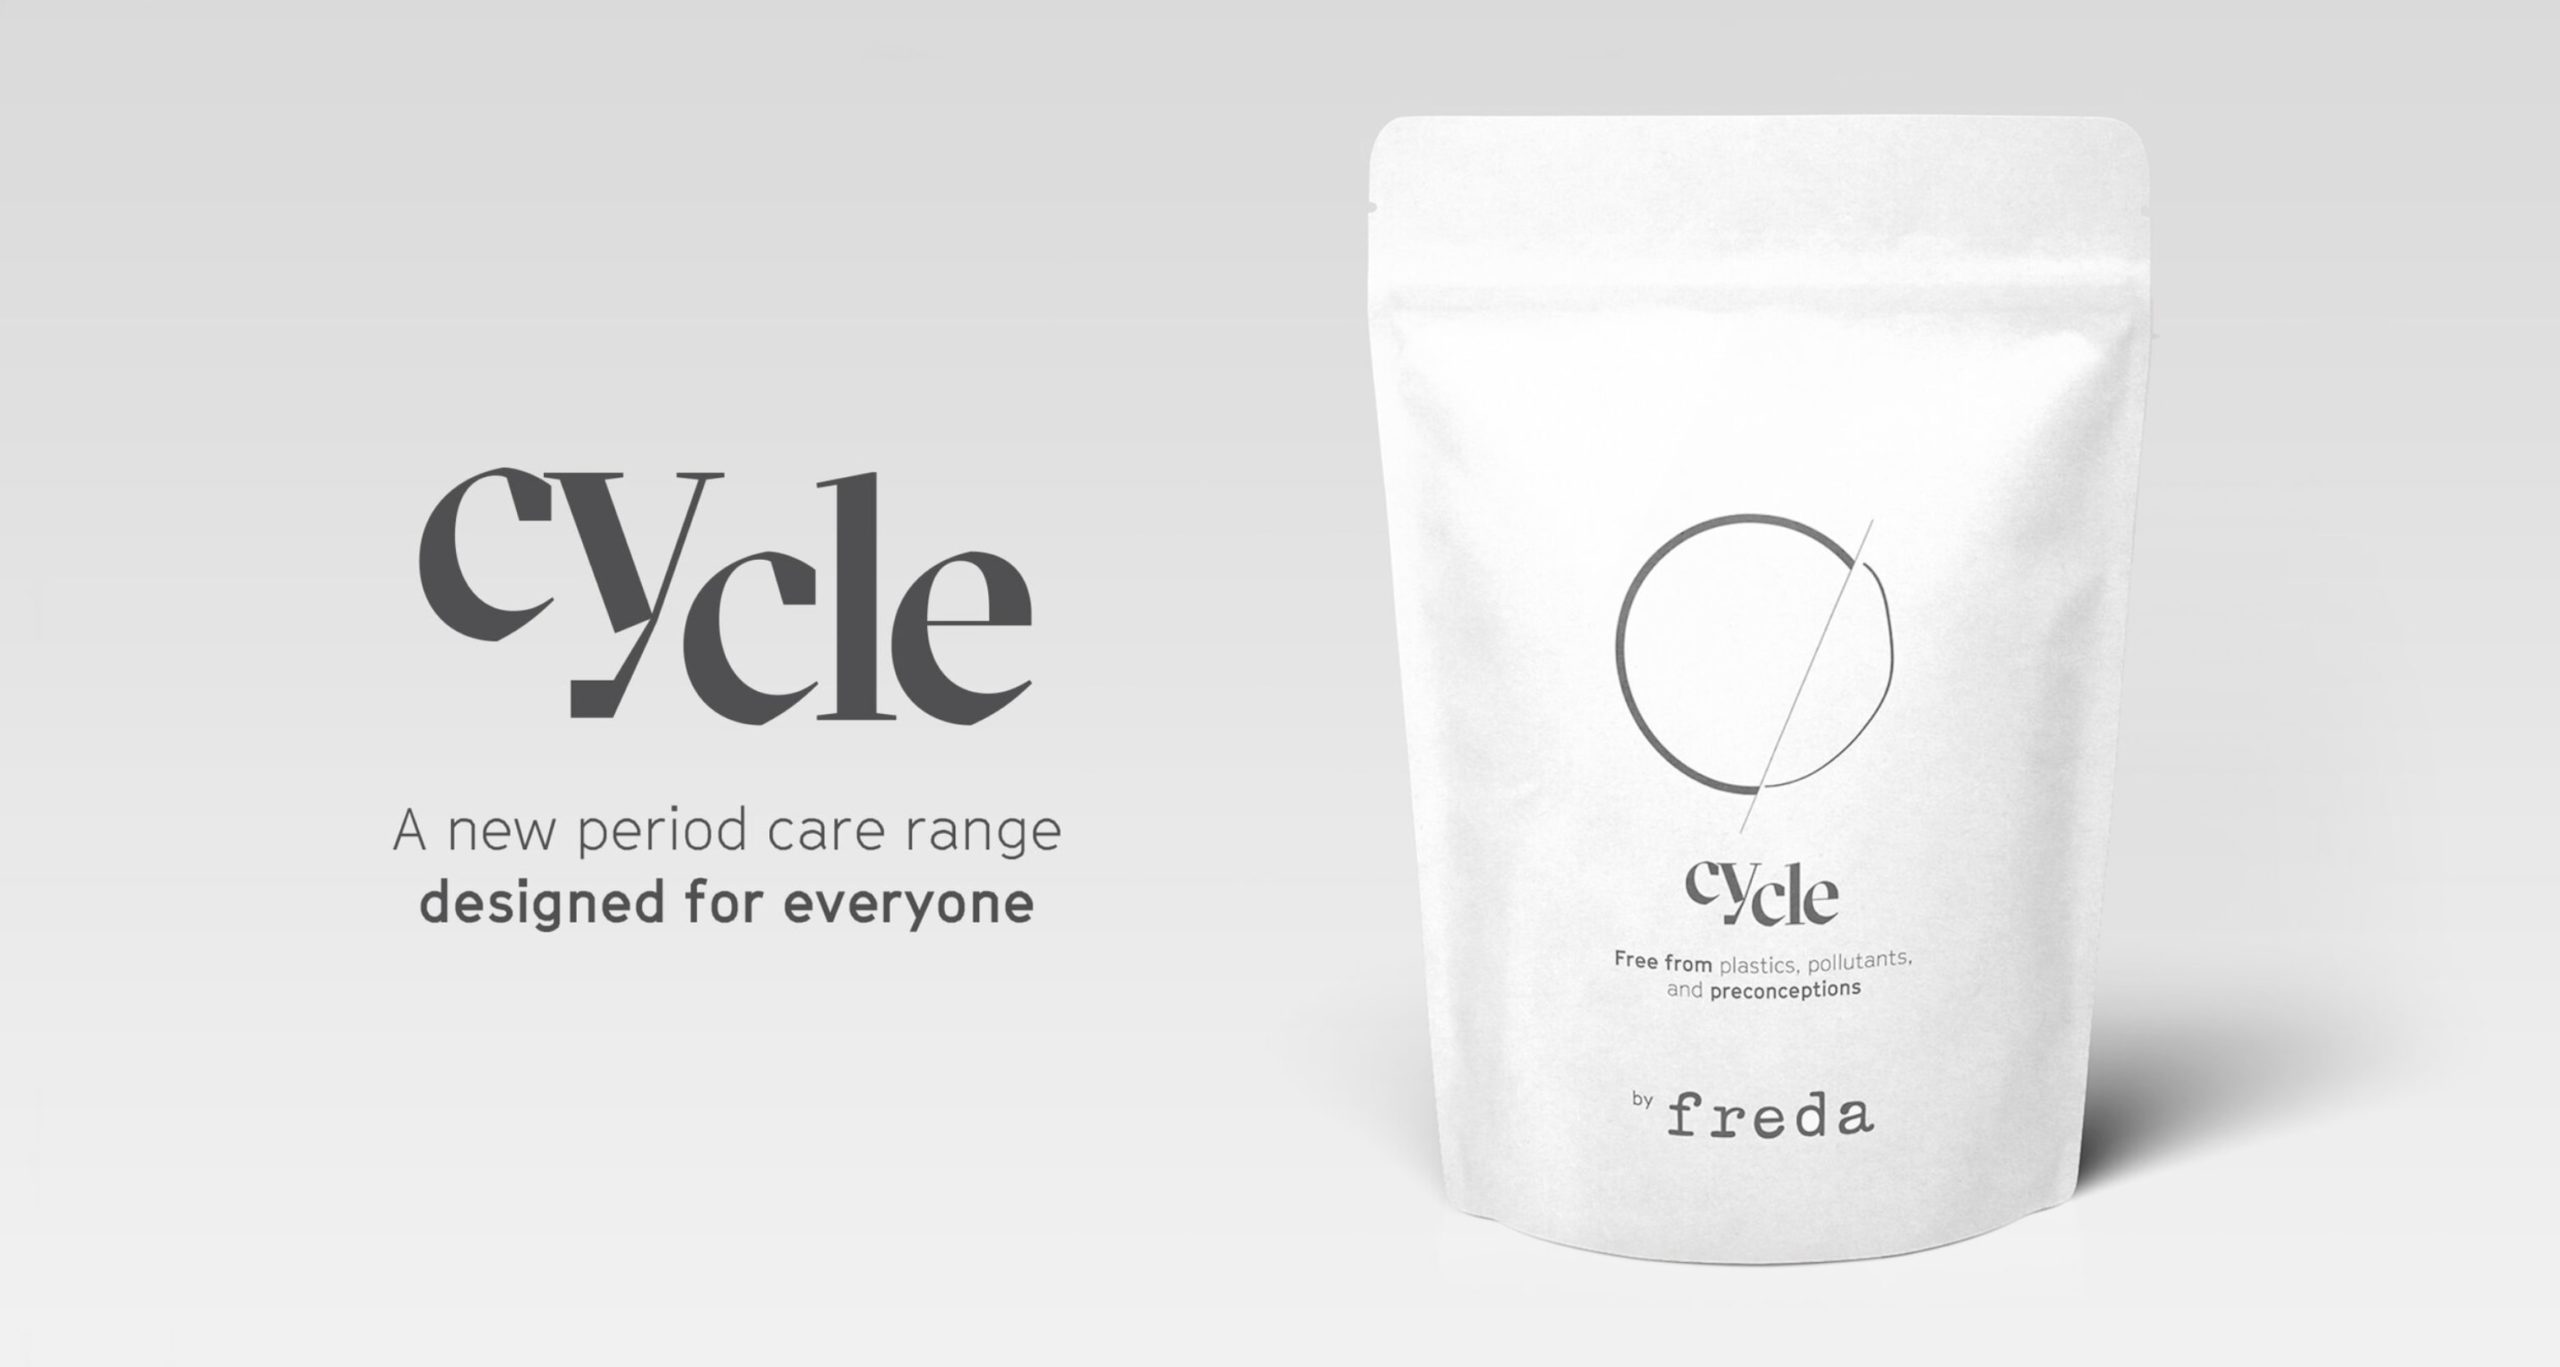 Cycle by Freda